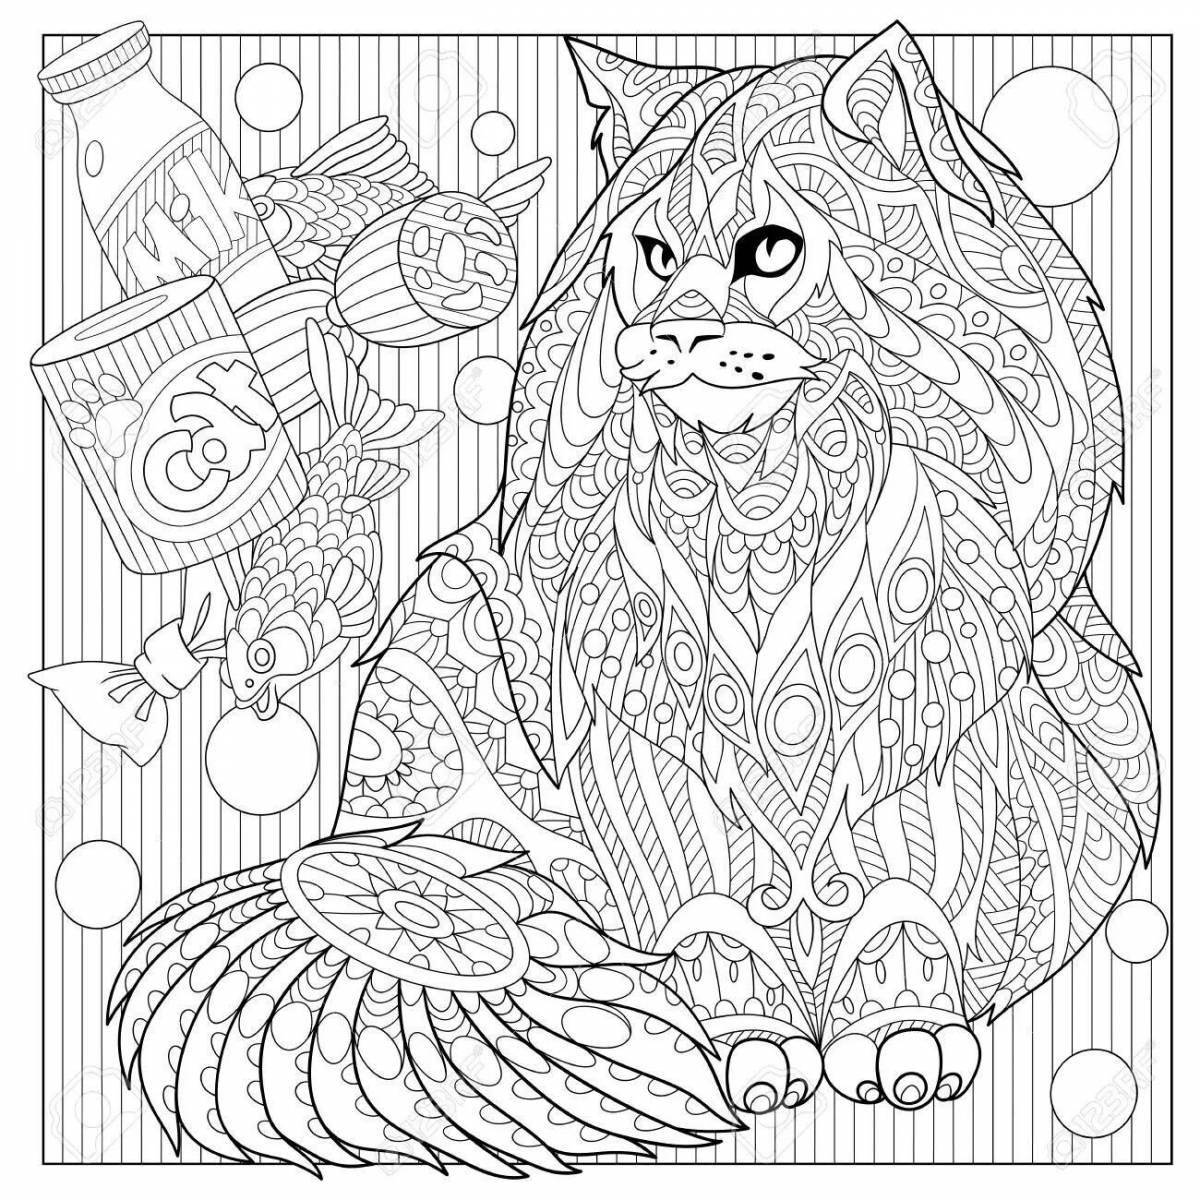 Exciting anti-stress coloring raccoon